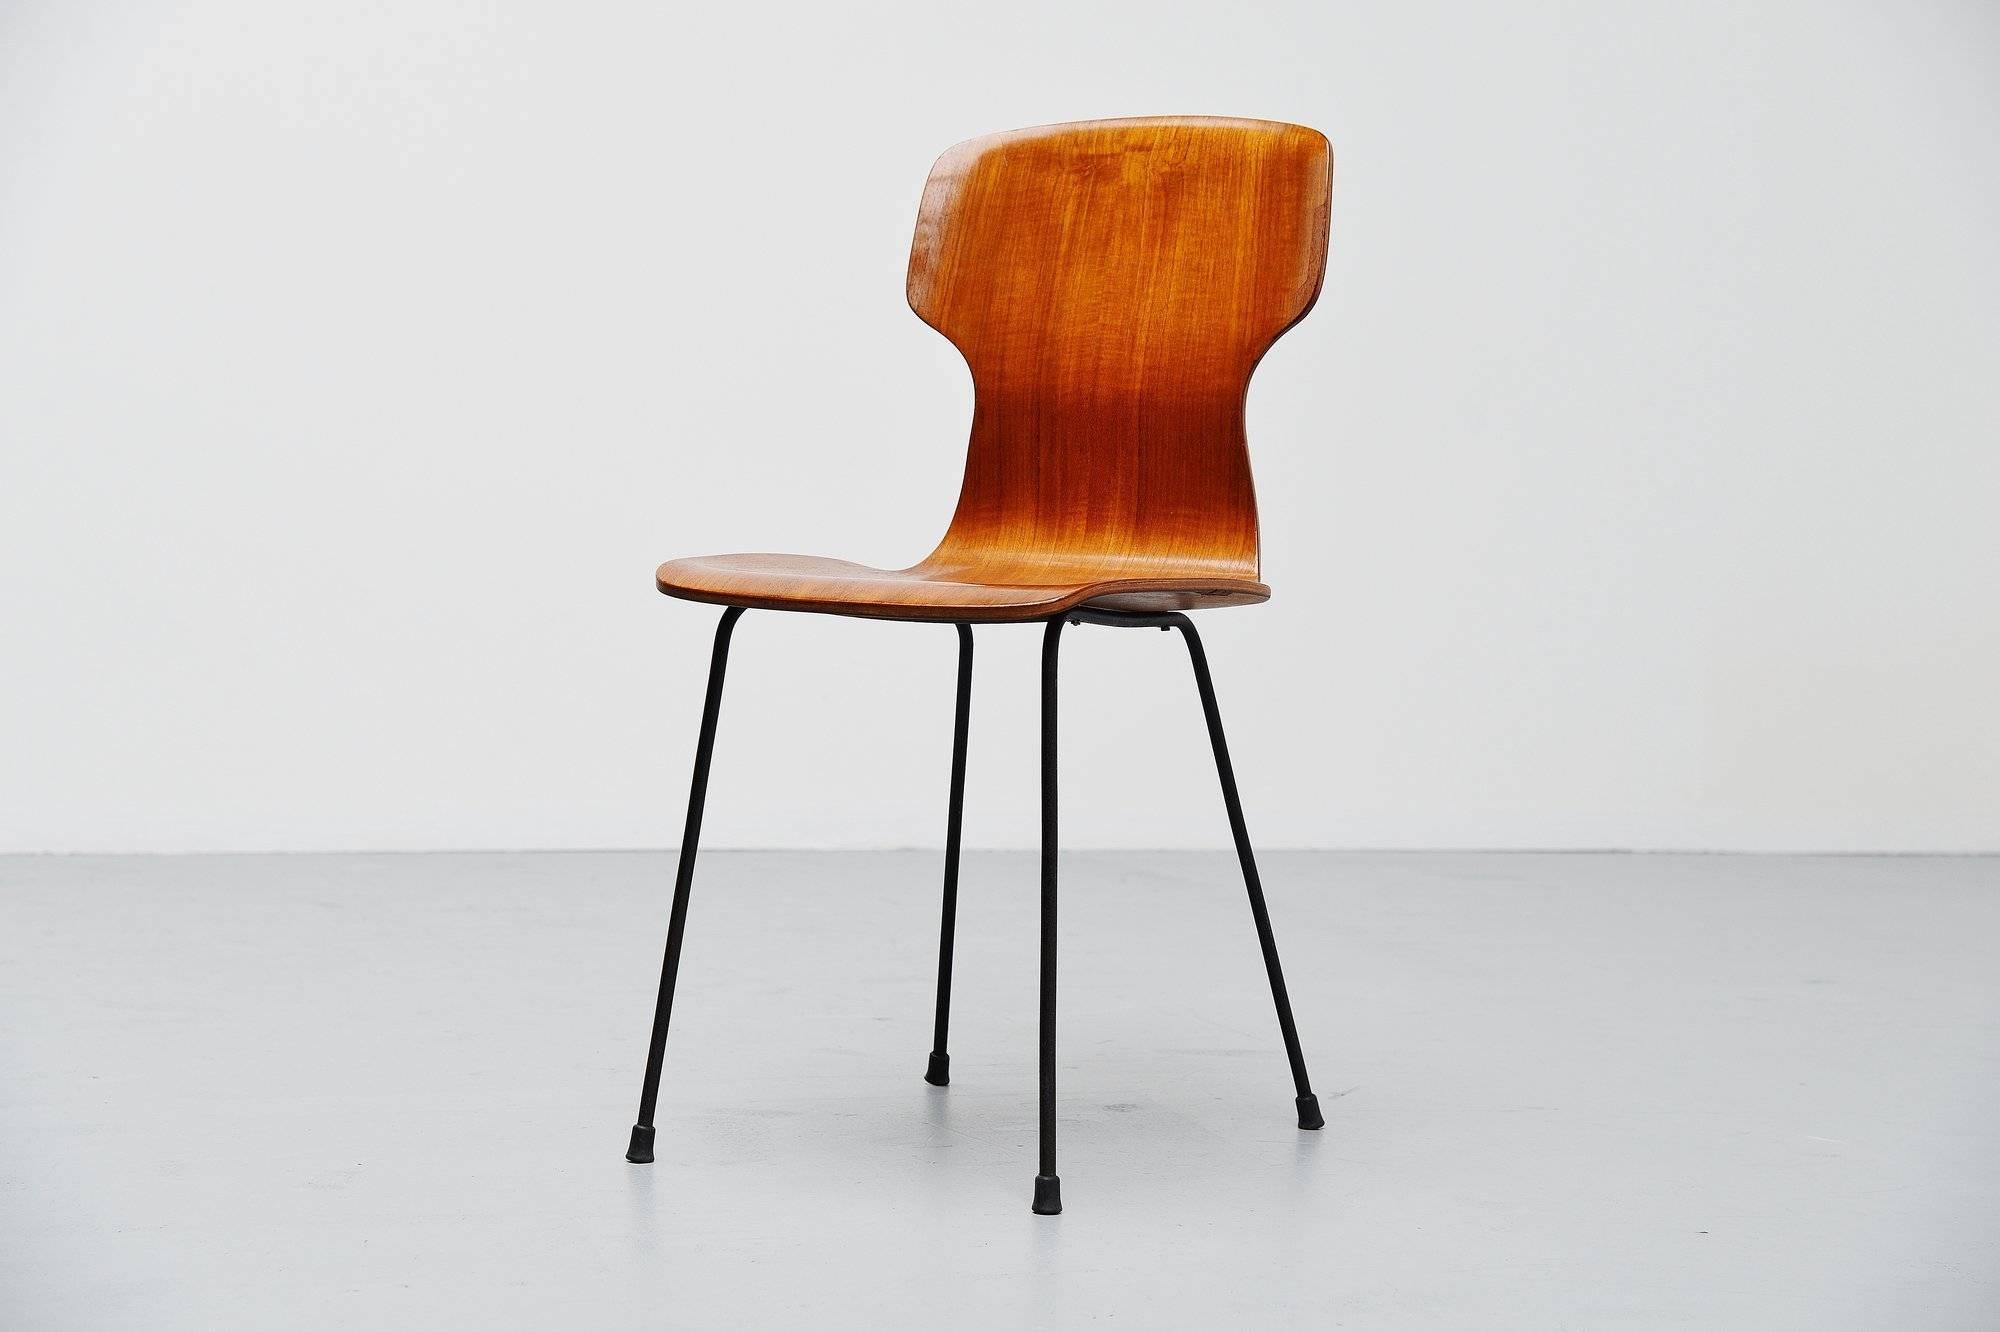 Cold-Painted Carlo Ratti Side Chair in Plywood by Legni Curva, Italy, 1950